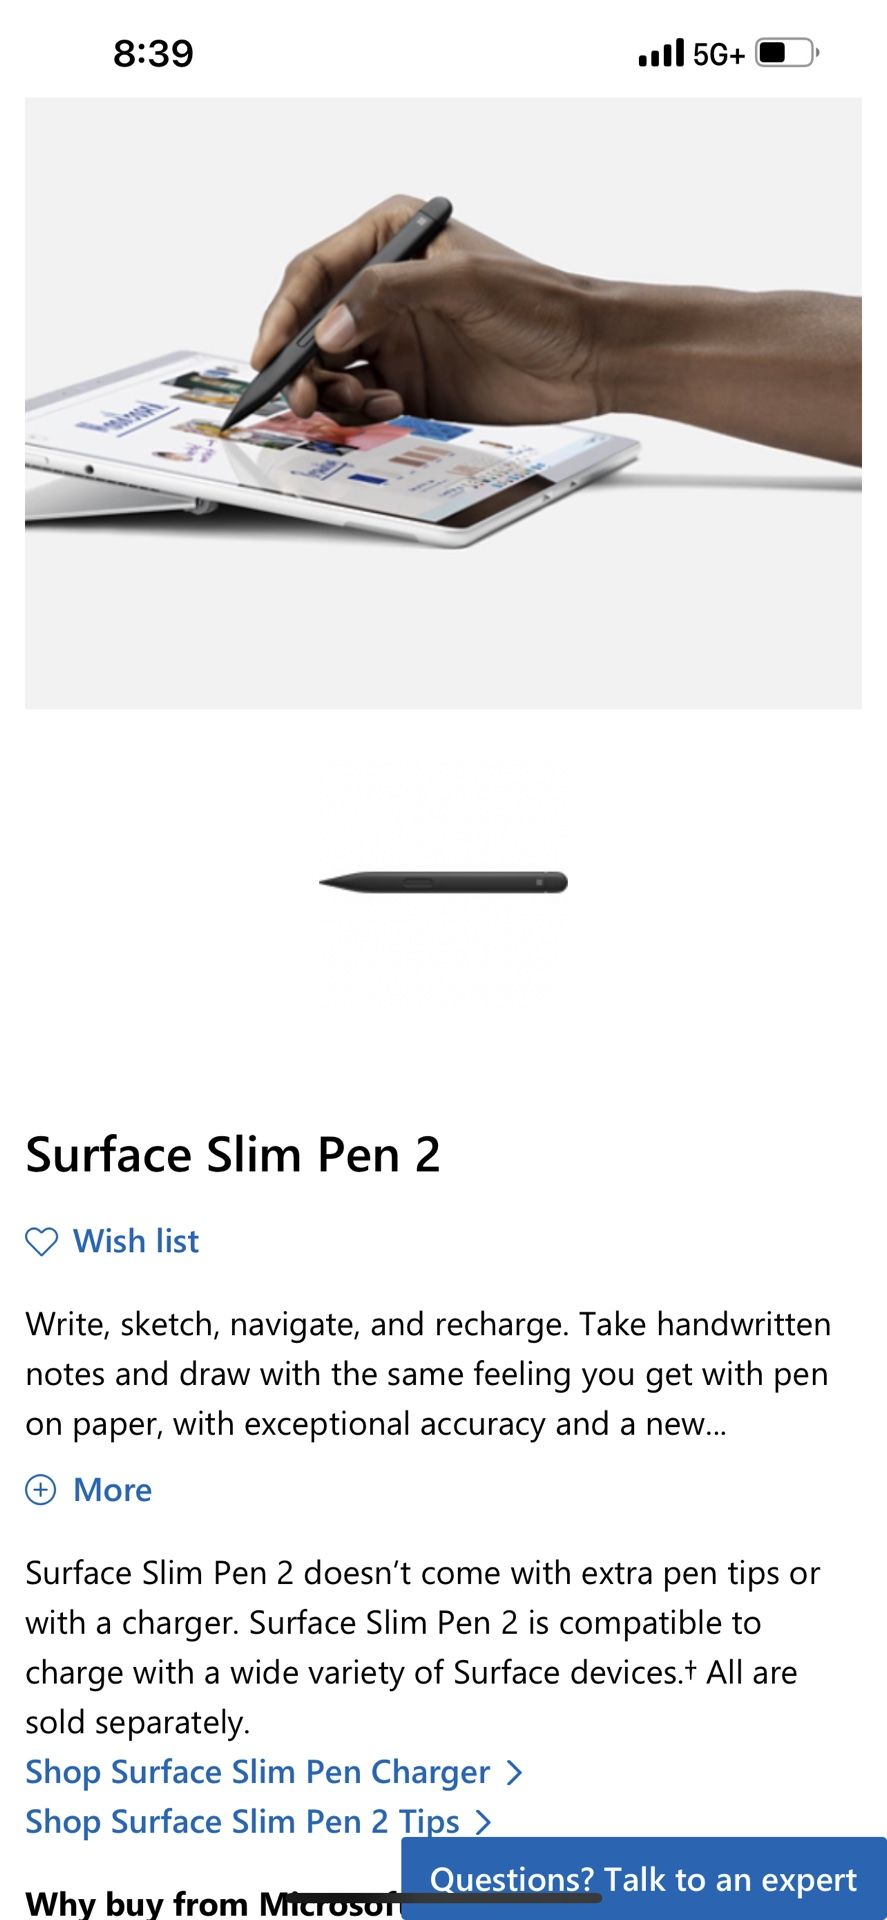 Microsoft Surface Slim Pen 2 & Charger 